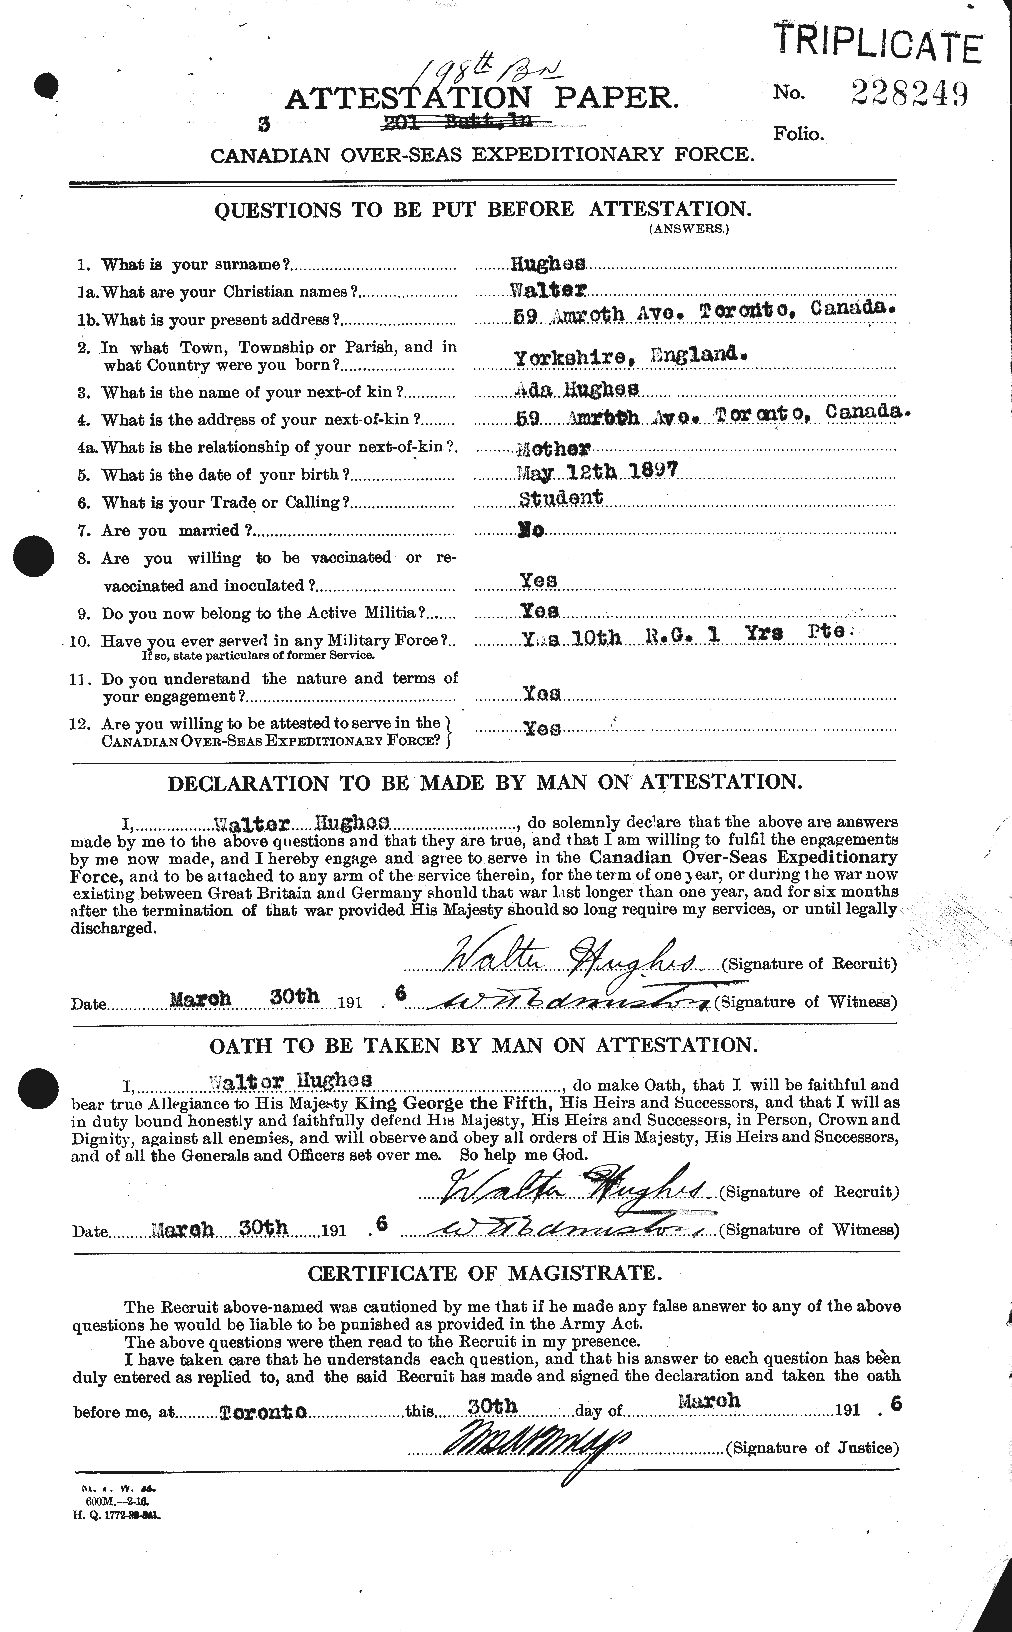 Personnel Records of the First World War - CEF 405856a